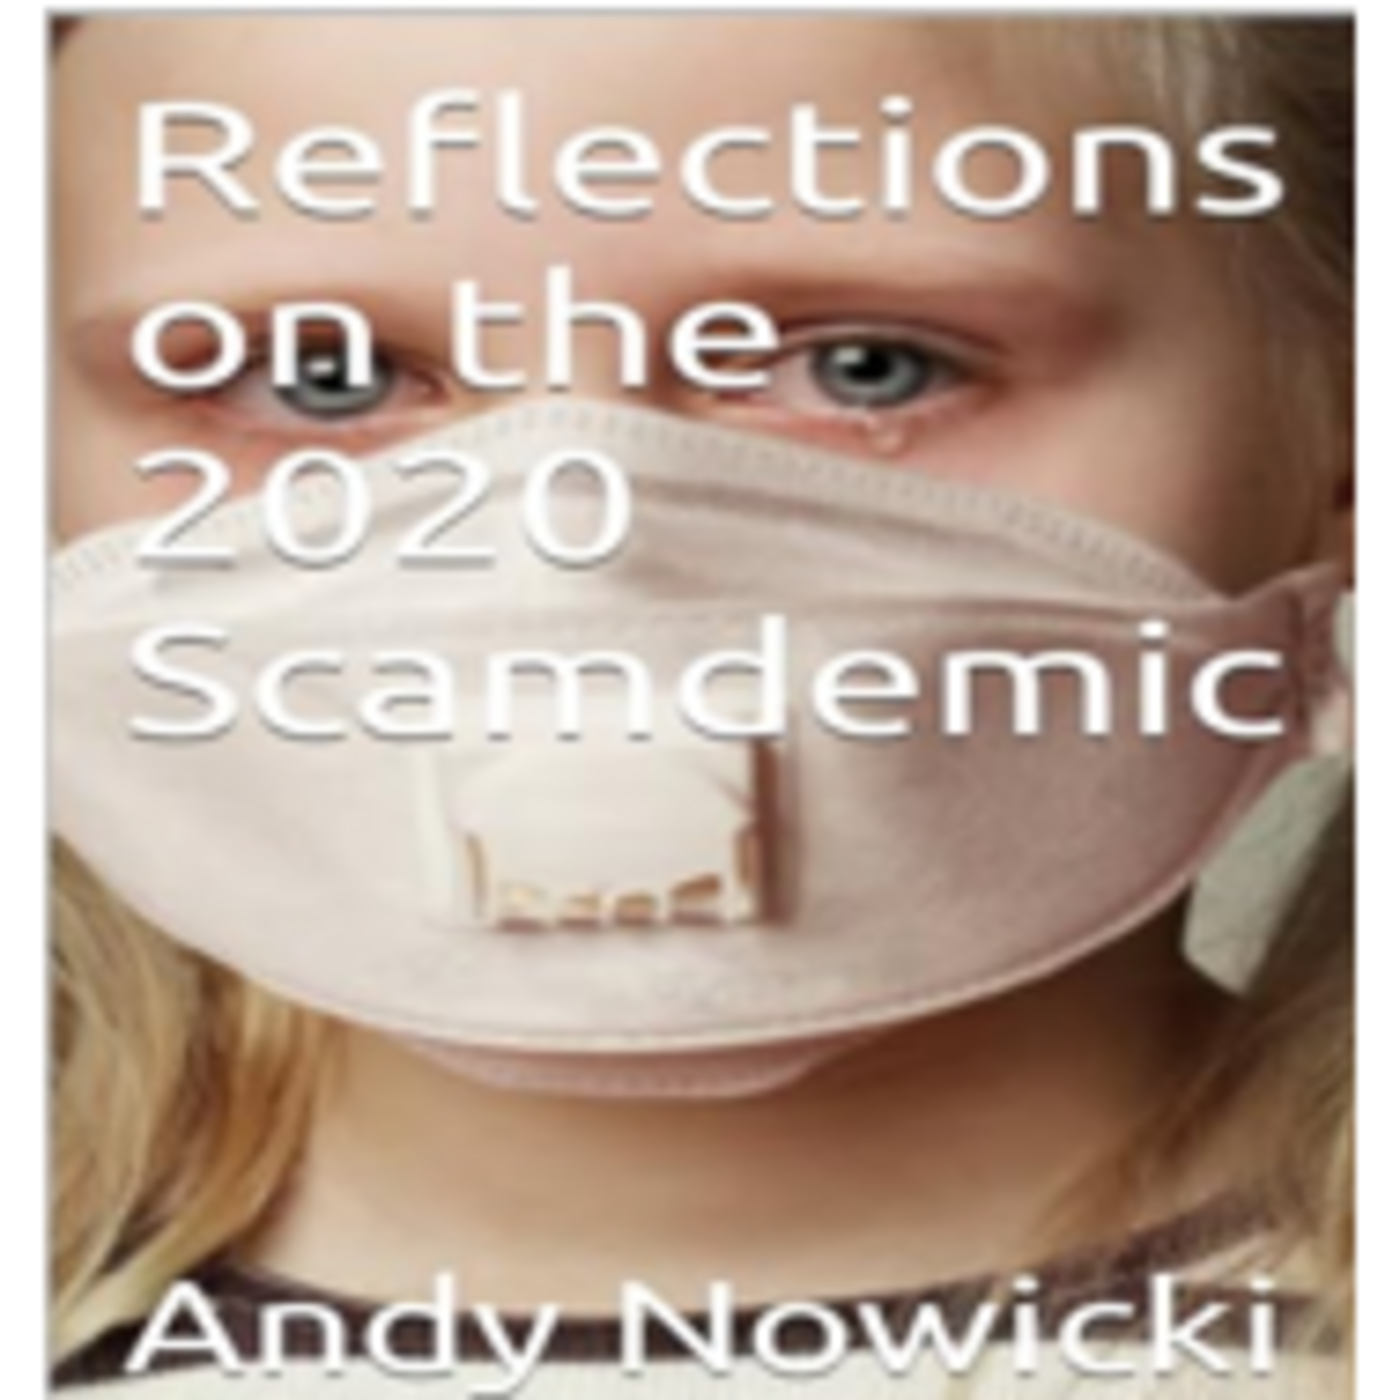 Episode 448: Andy Nowicki on Reflections on the 2020 Scamdemic